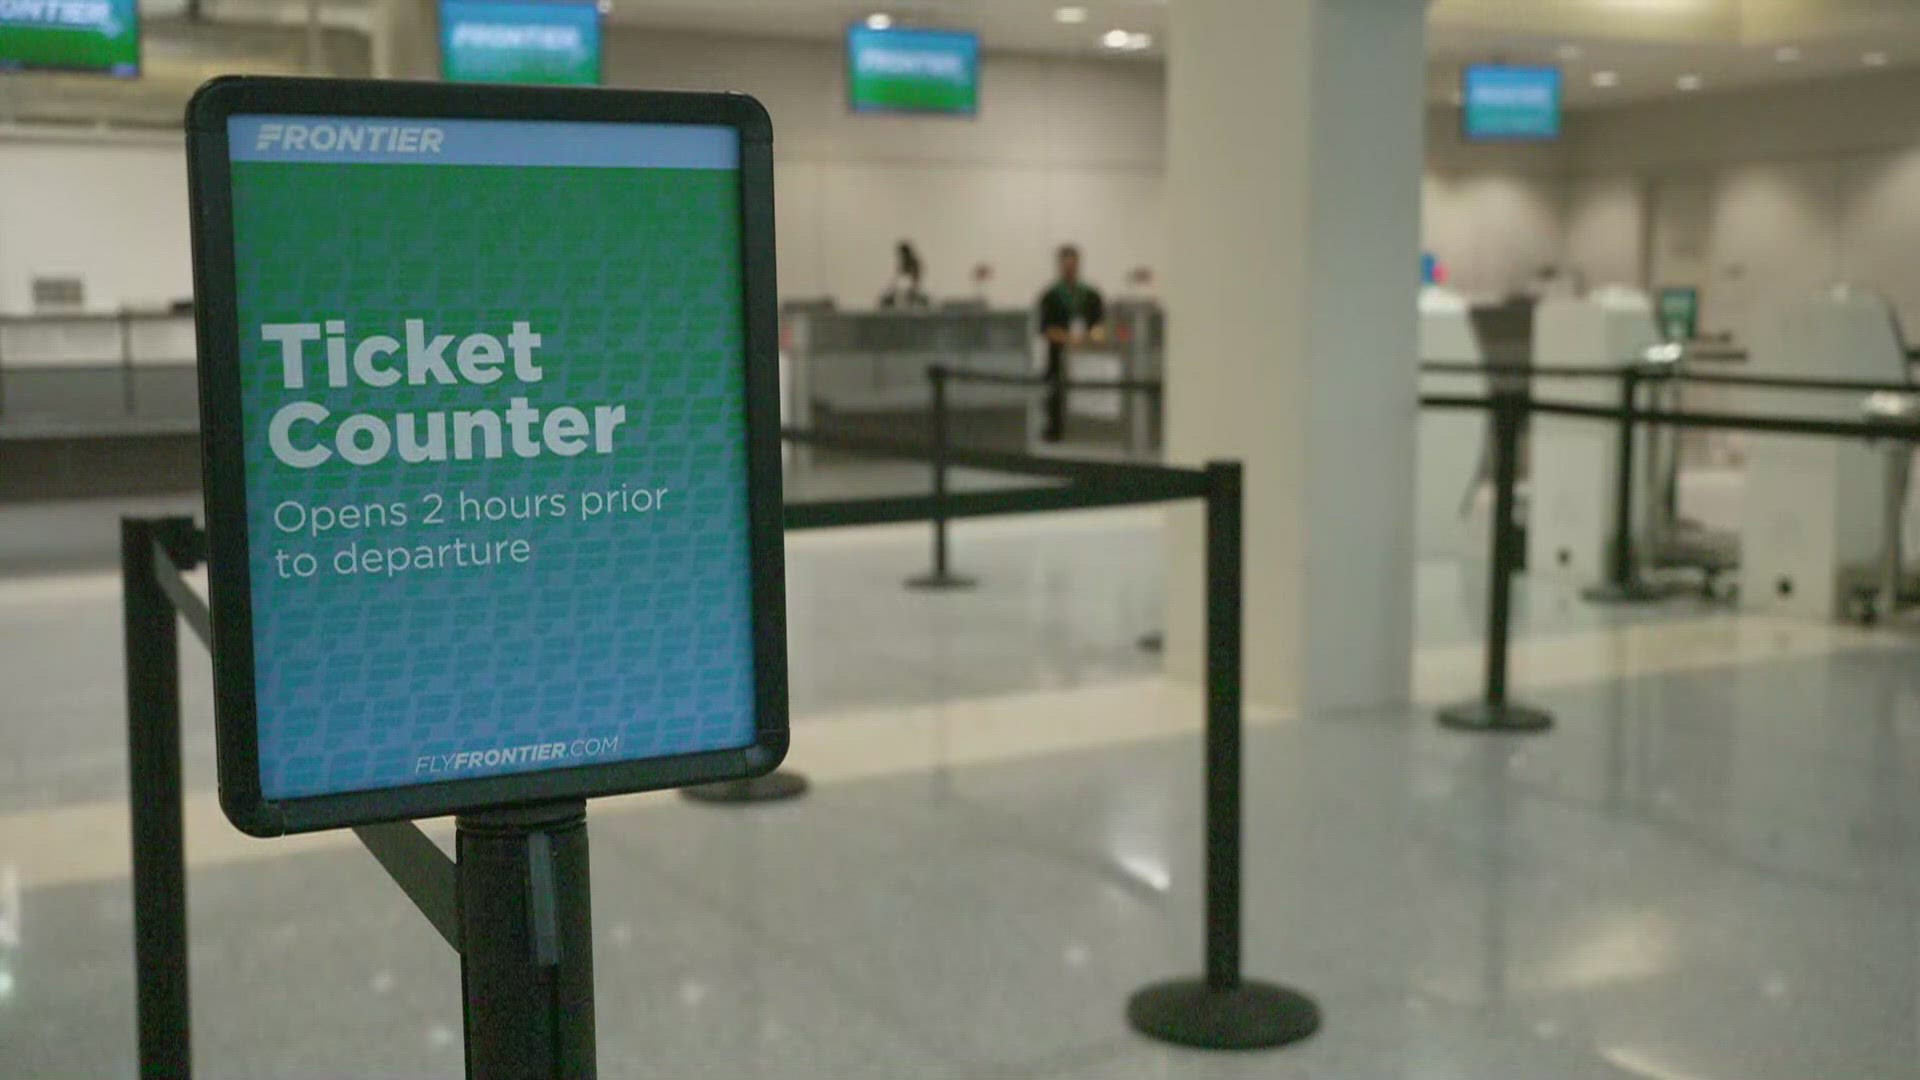 Frontier Airlines is adding 14 new destinations to cities including Houston, Nashville, Chicago, and Los Angeles.